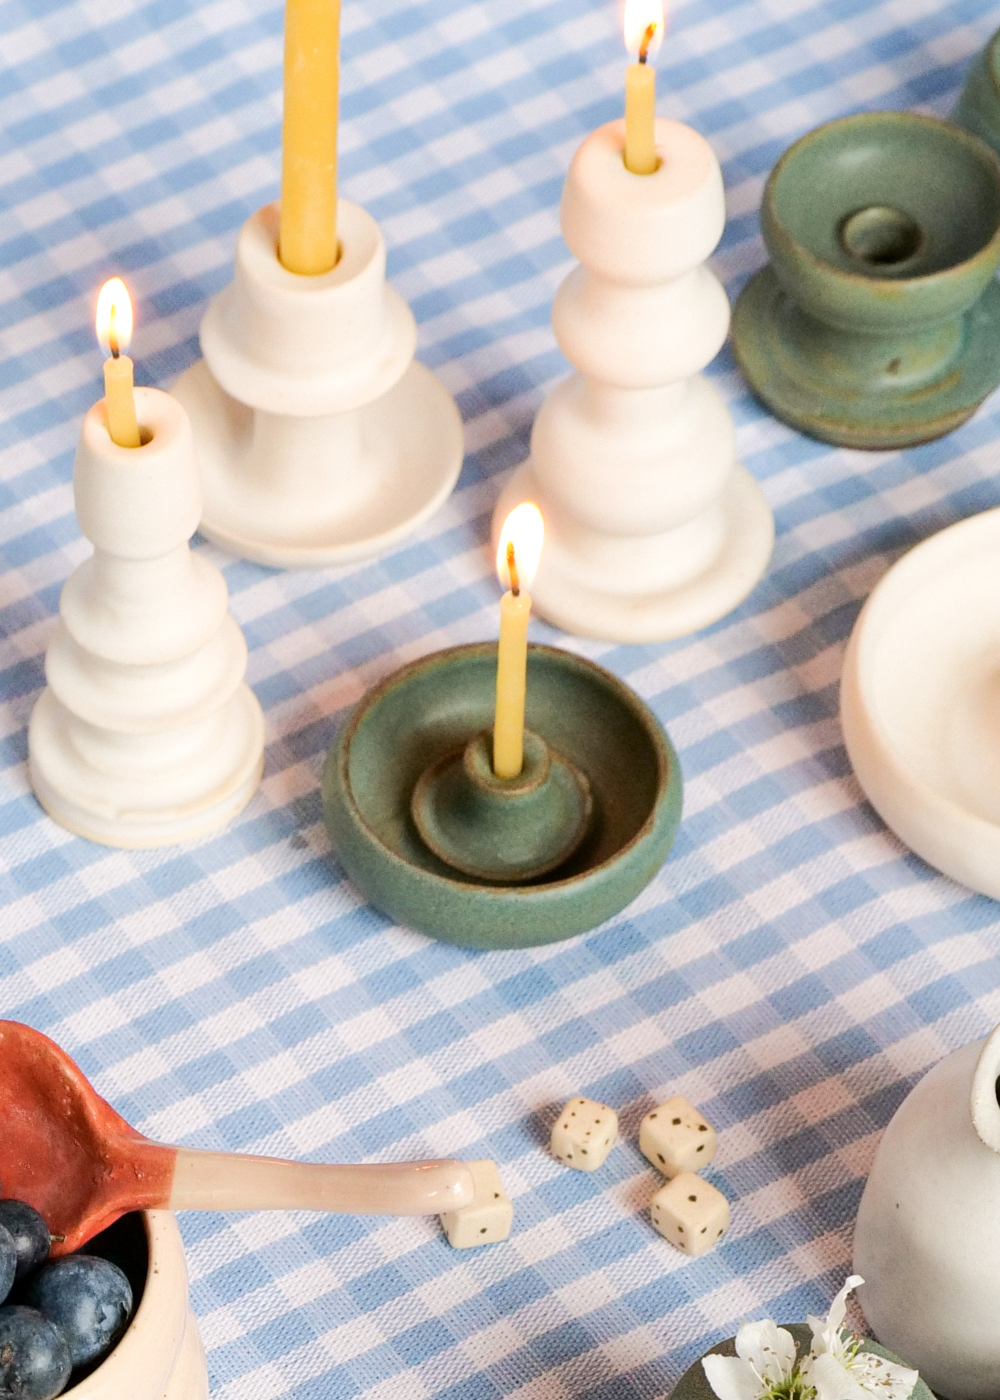 Tiny Green Fluted Candlestick Holder